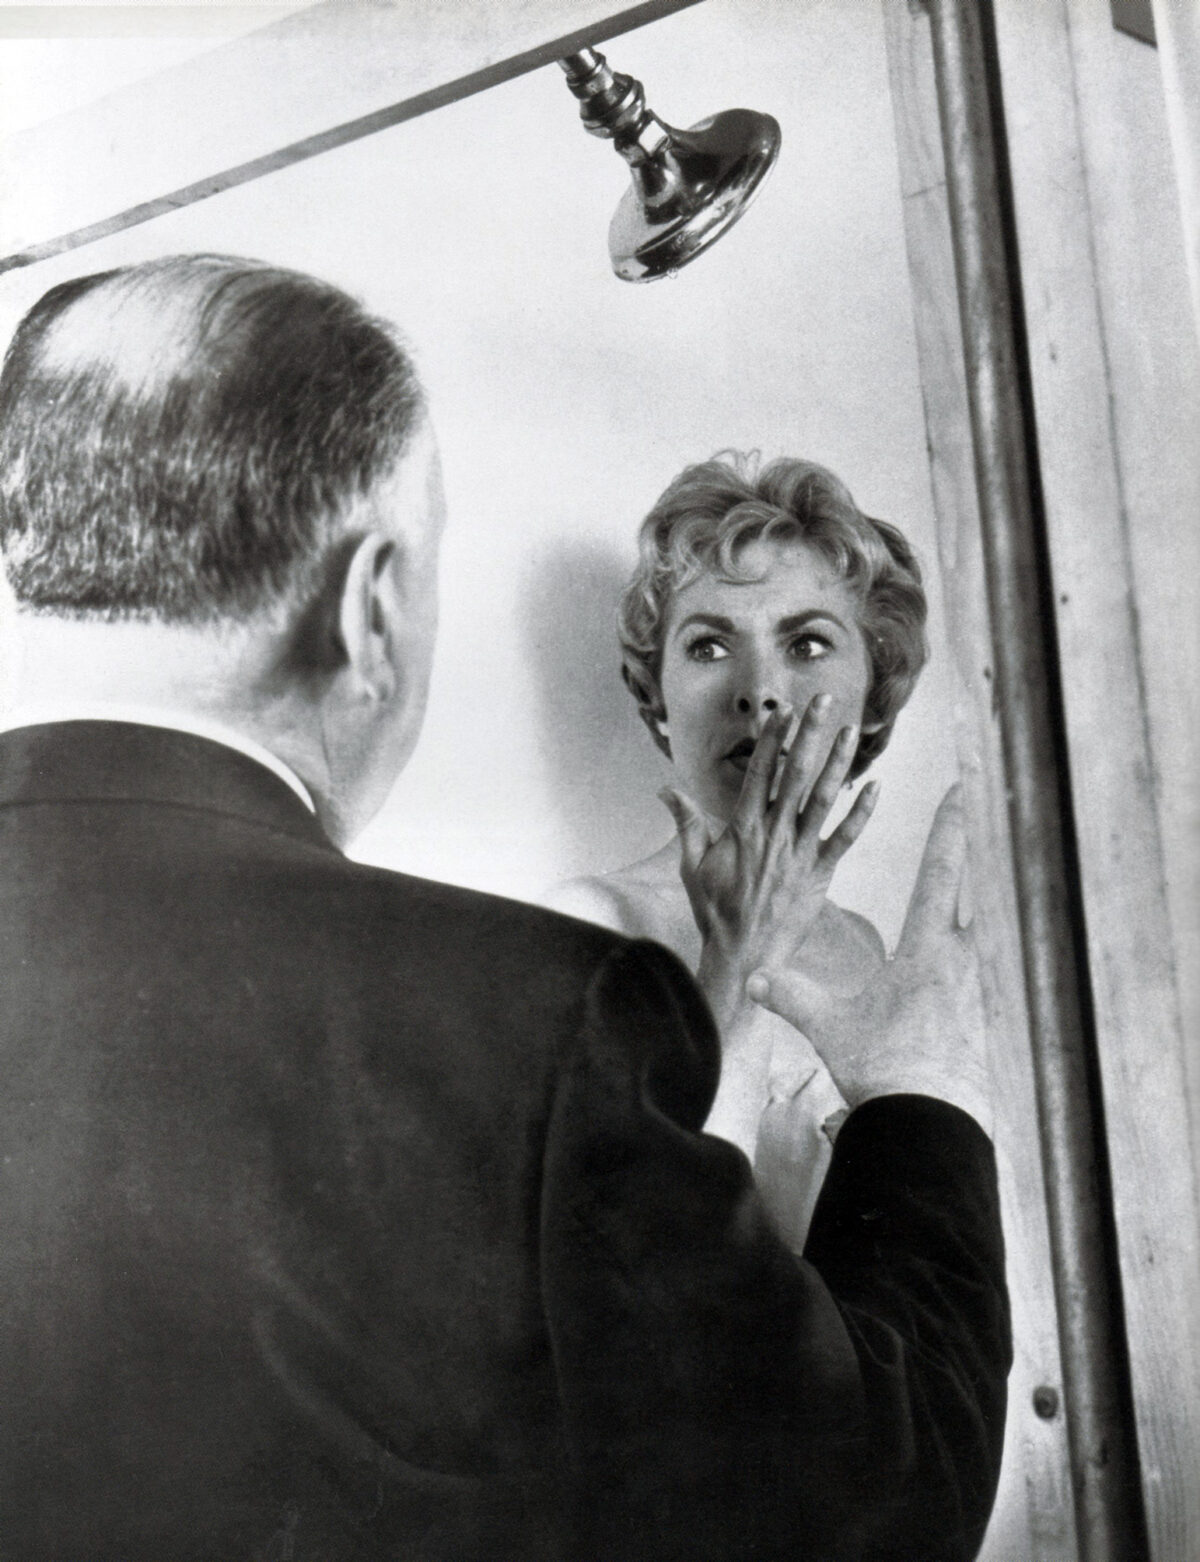 Alfred Hitchock directing actress Janet Leigh in the movie “Psycho.” This image by Laura Loveday is licensed under CC BY-SA 2.0